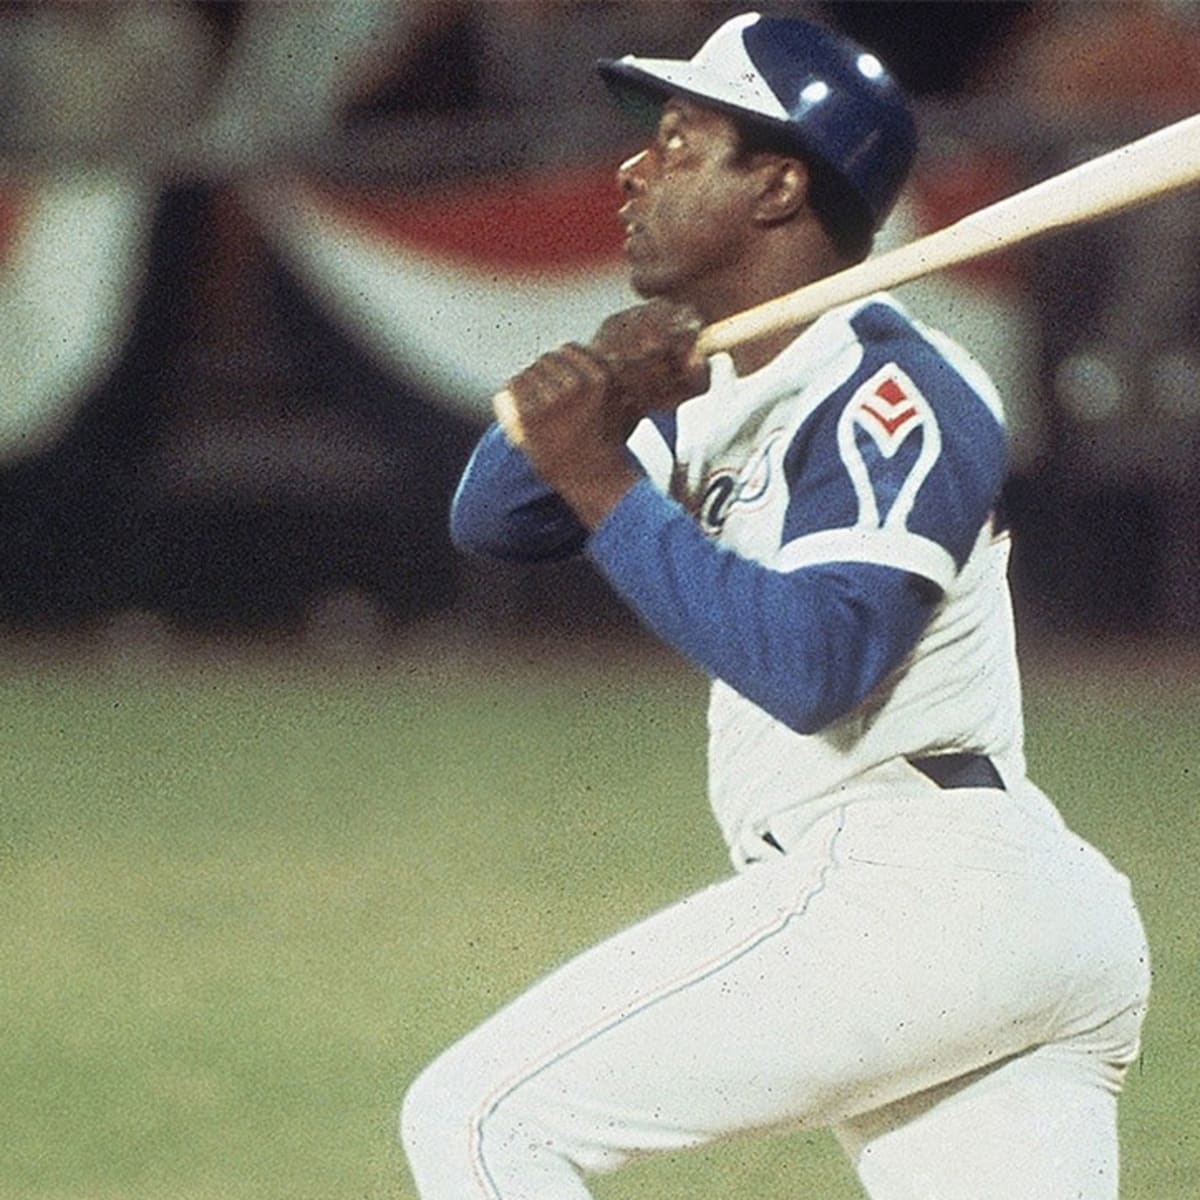 Hank Aaron stats: A look at the legend's greatest achievements